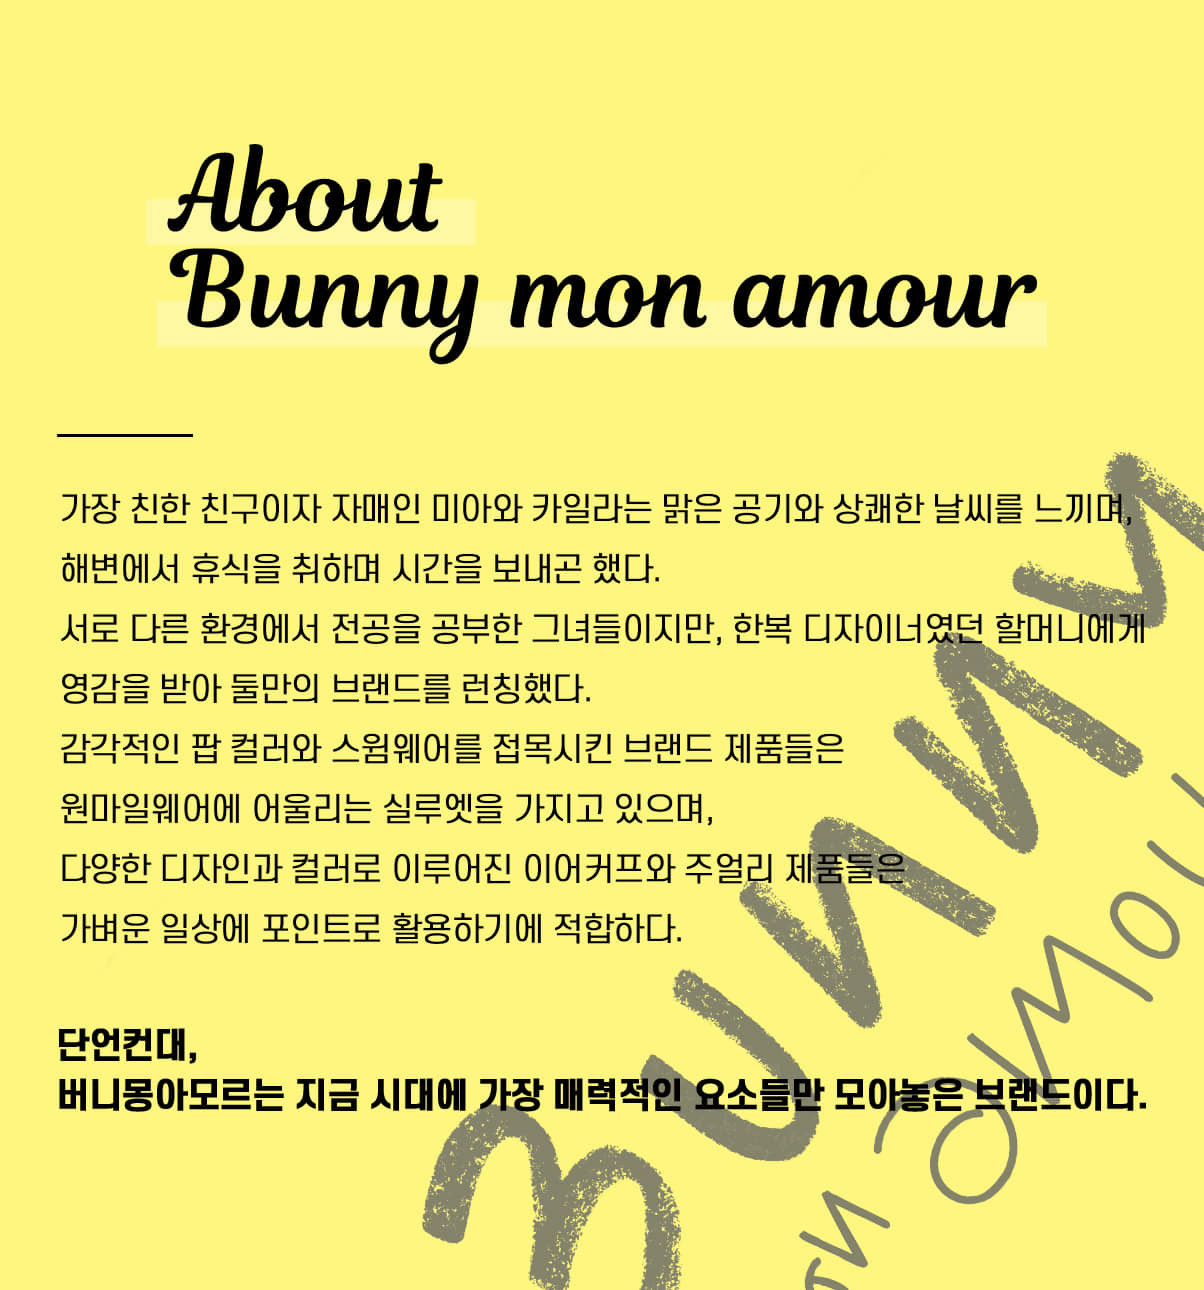 about bunnymon amour